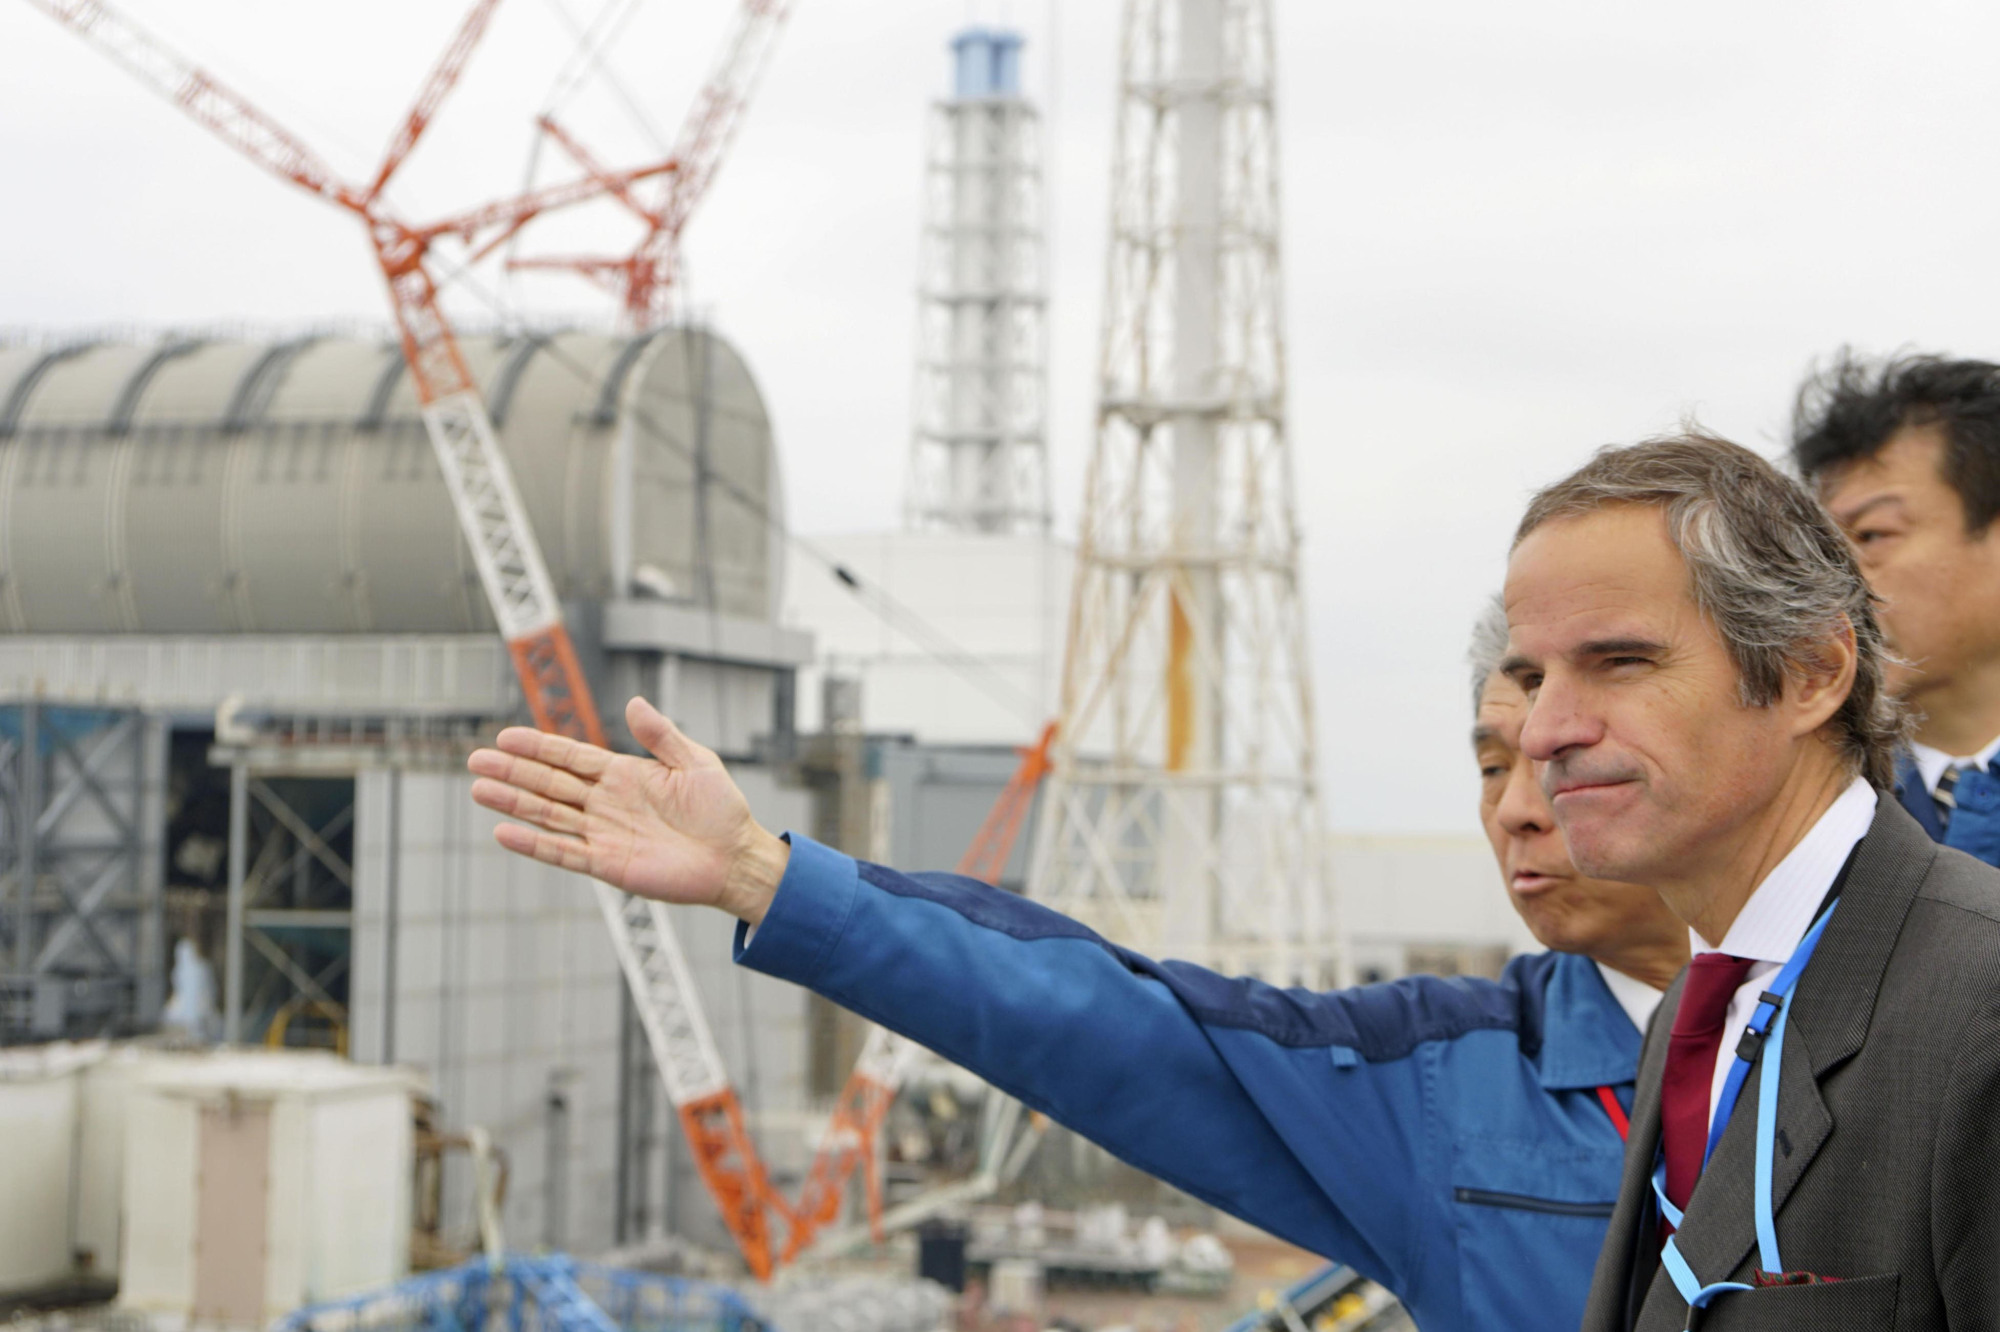 IAEA Director General Rafael Grossi inspects the Fukushima No. 1 nuclear power plant on Wednesday. | KYODO